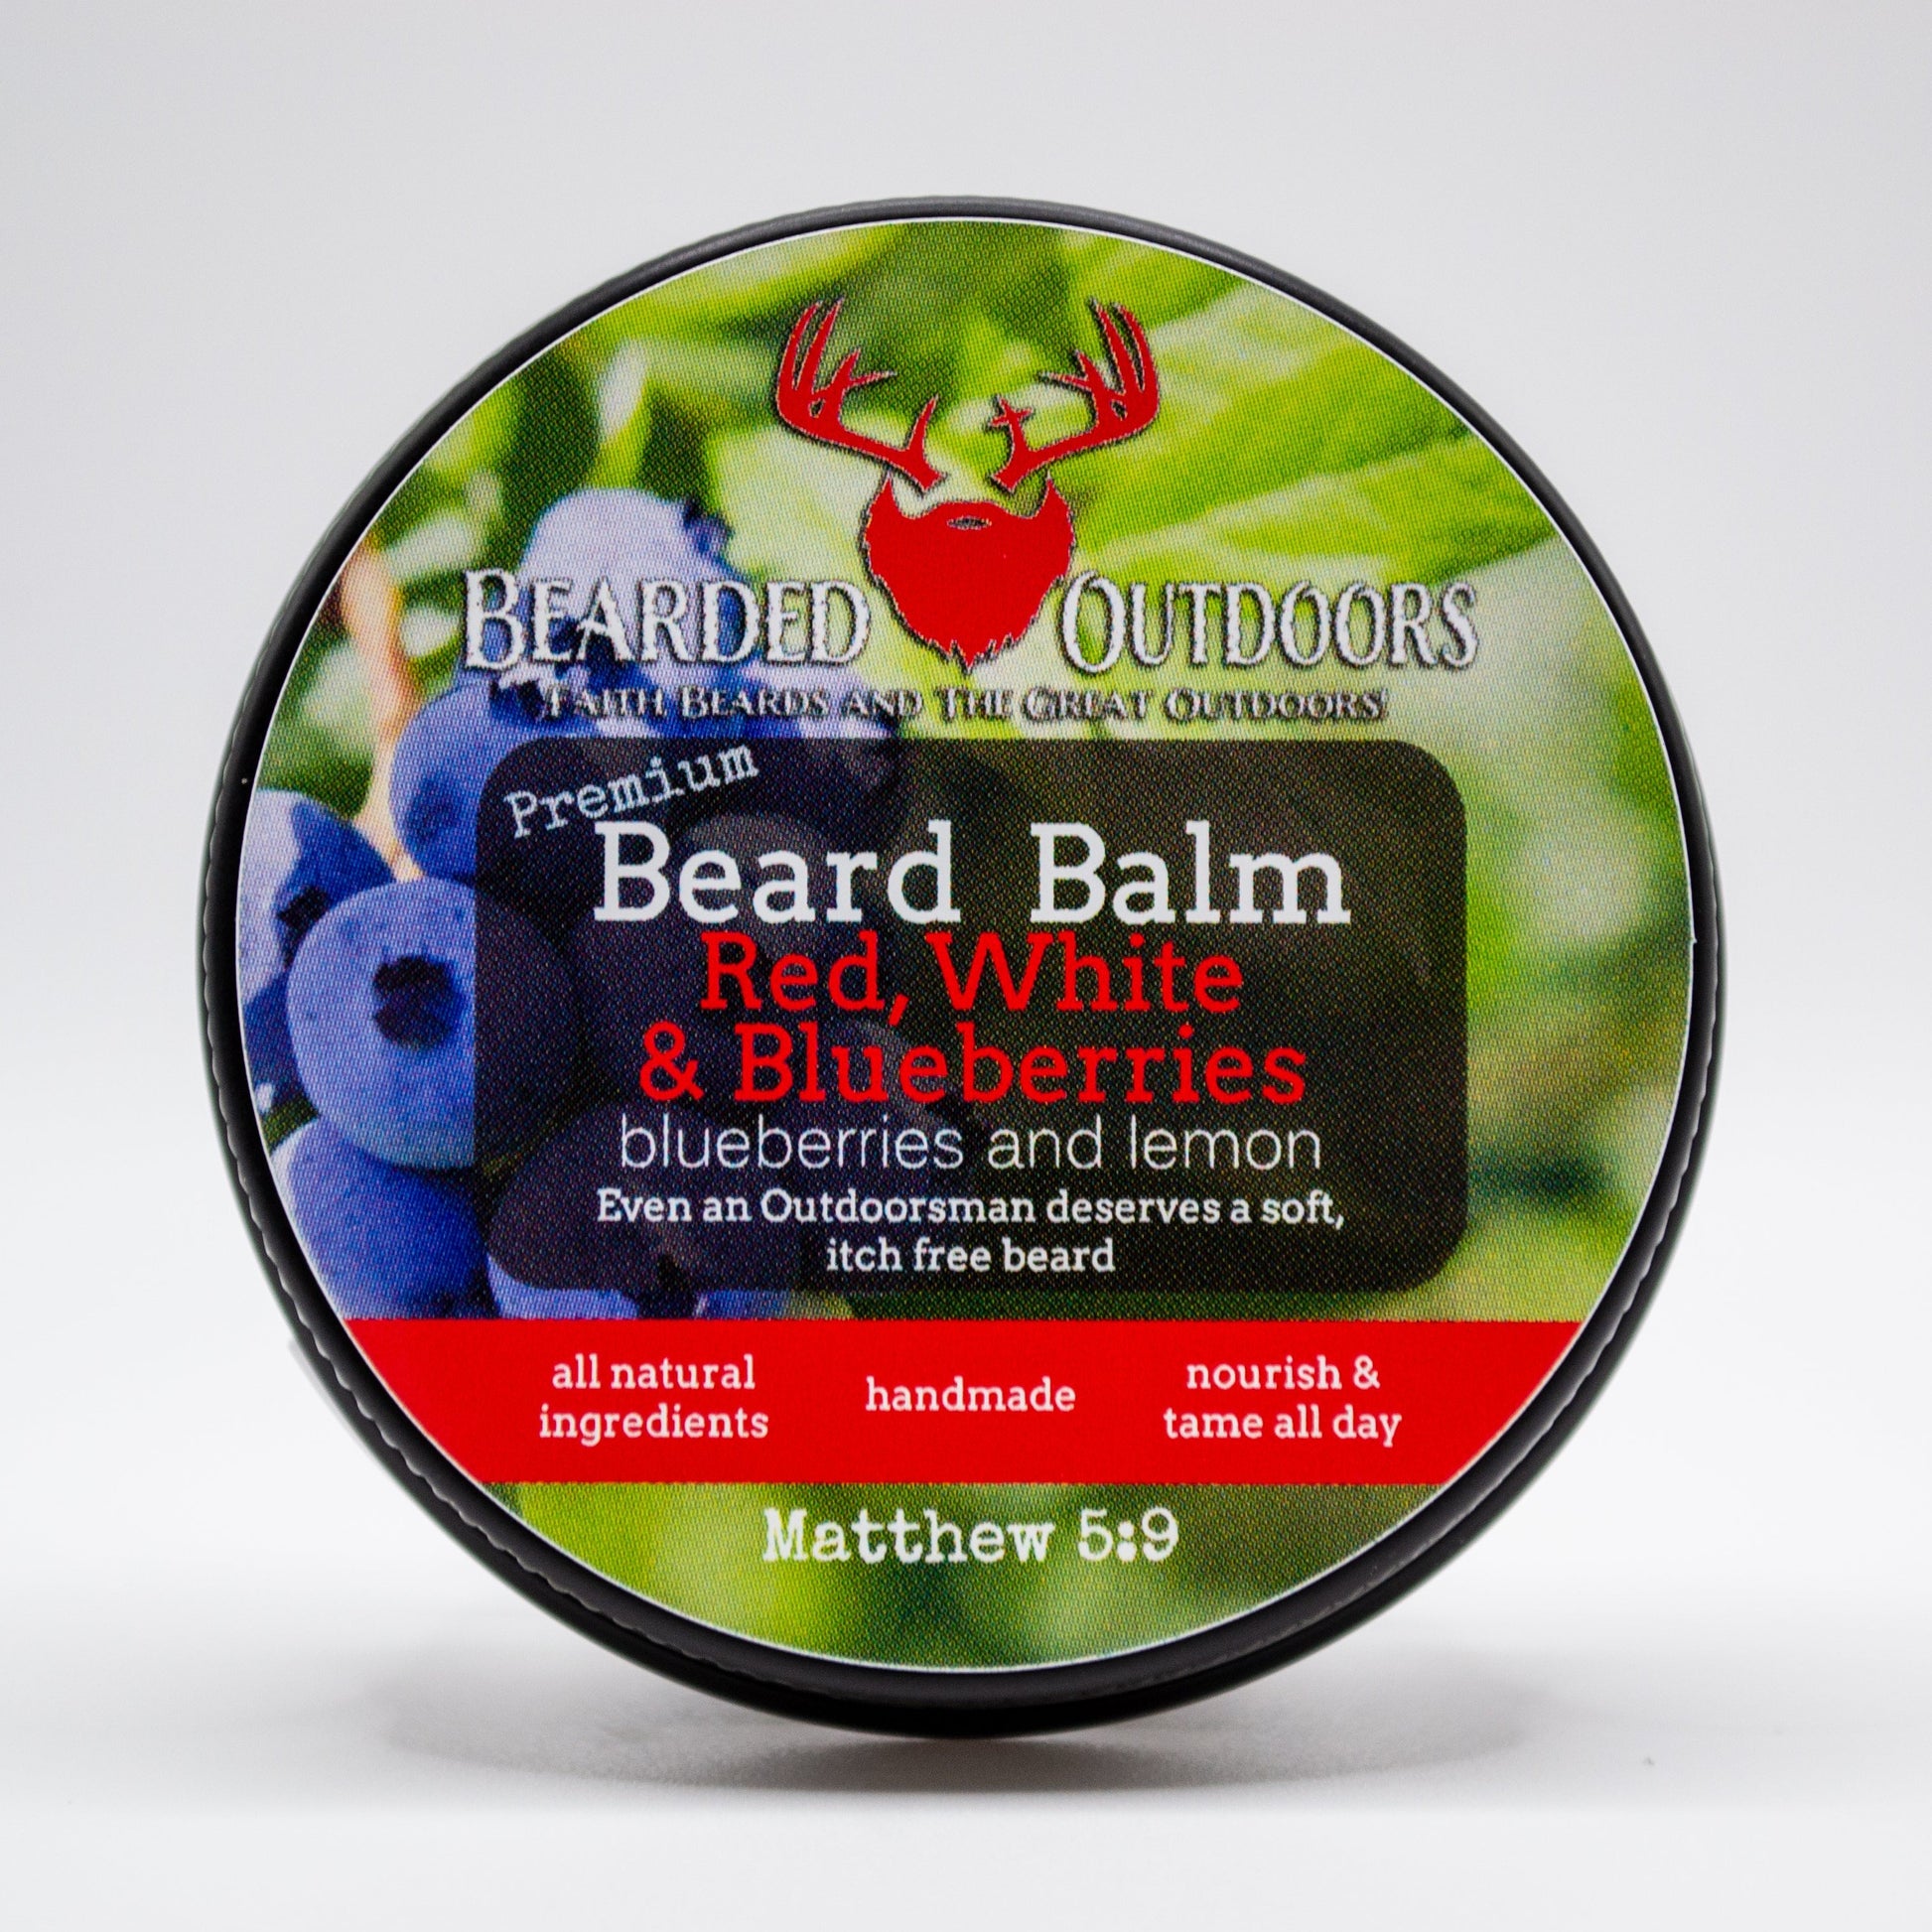 Red White and Blueberries (blueberry and lemon Scented) Premium Beard Balm by Bearded Outdoors